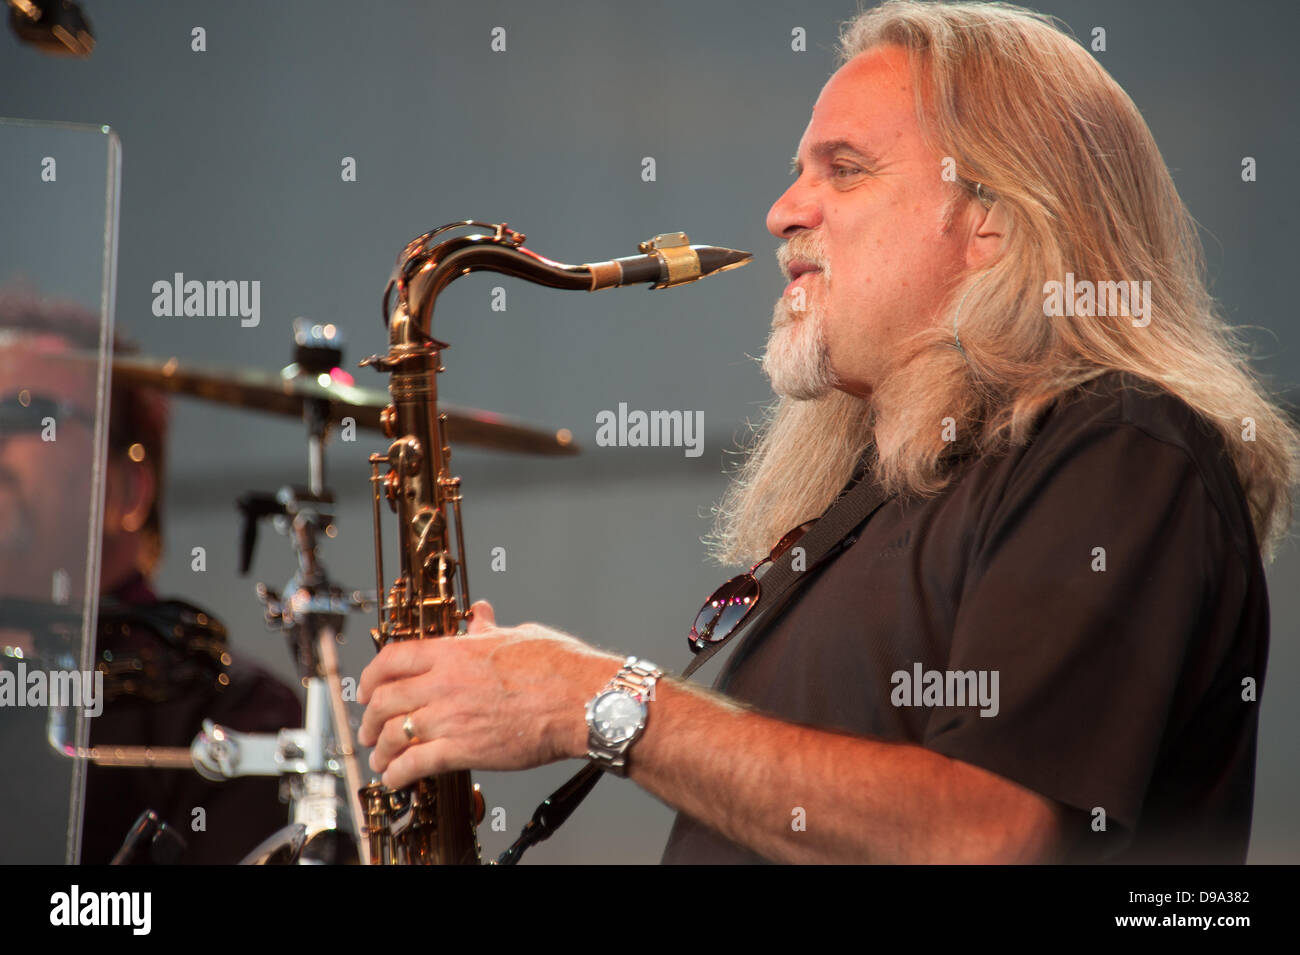 Lincoln, CA, USA. 14th June, 2013. Marc Russo performs with The Doobie Brothers perform at Thunder Valley Casino Resort in Lincoln, California on June 14th, 2013 Stock Photo